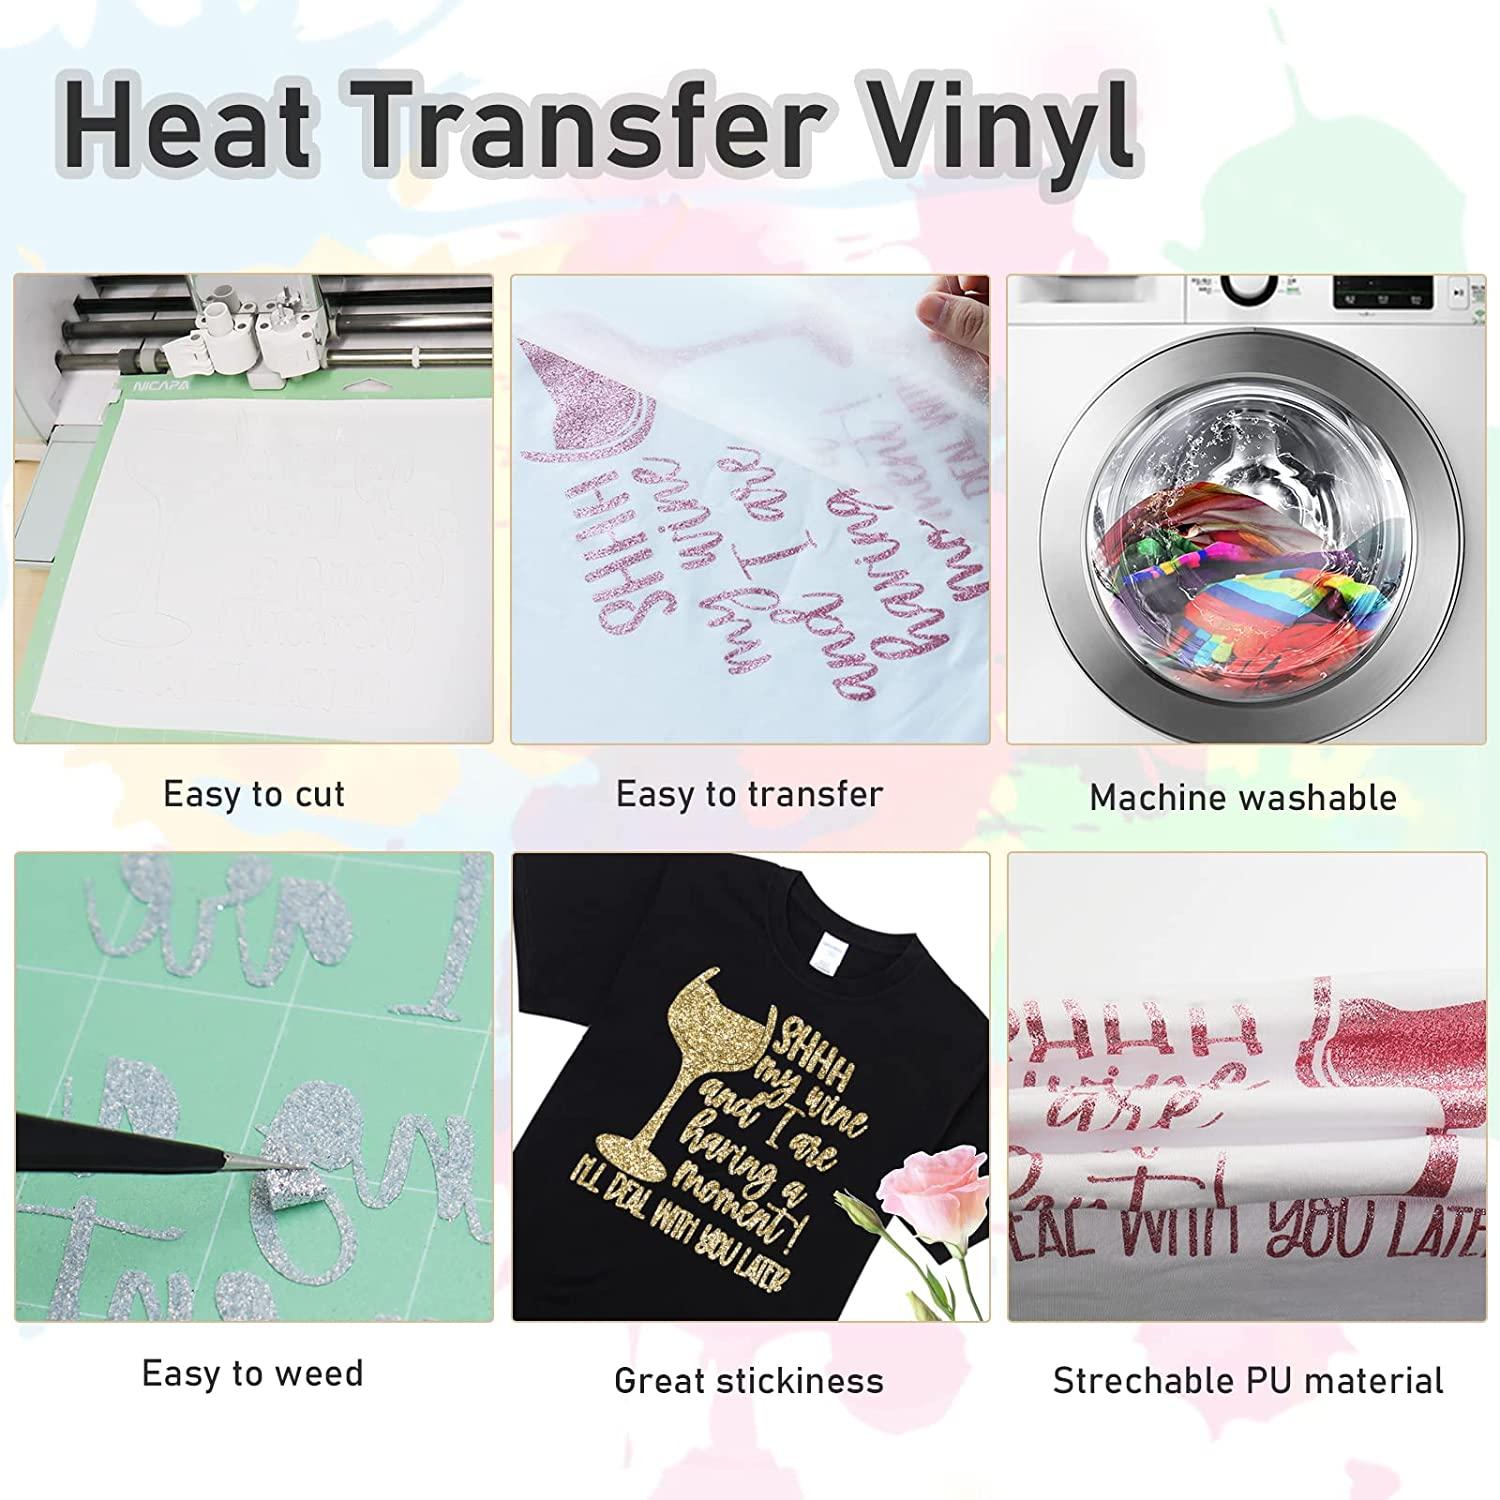 Craftables Midnight Green Heat Transfer Vinyl Htv - 5 Sheets Easy To Weed  Tshirt Iron On Vinyl For Silhouette Cameo, Cricut, All